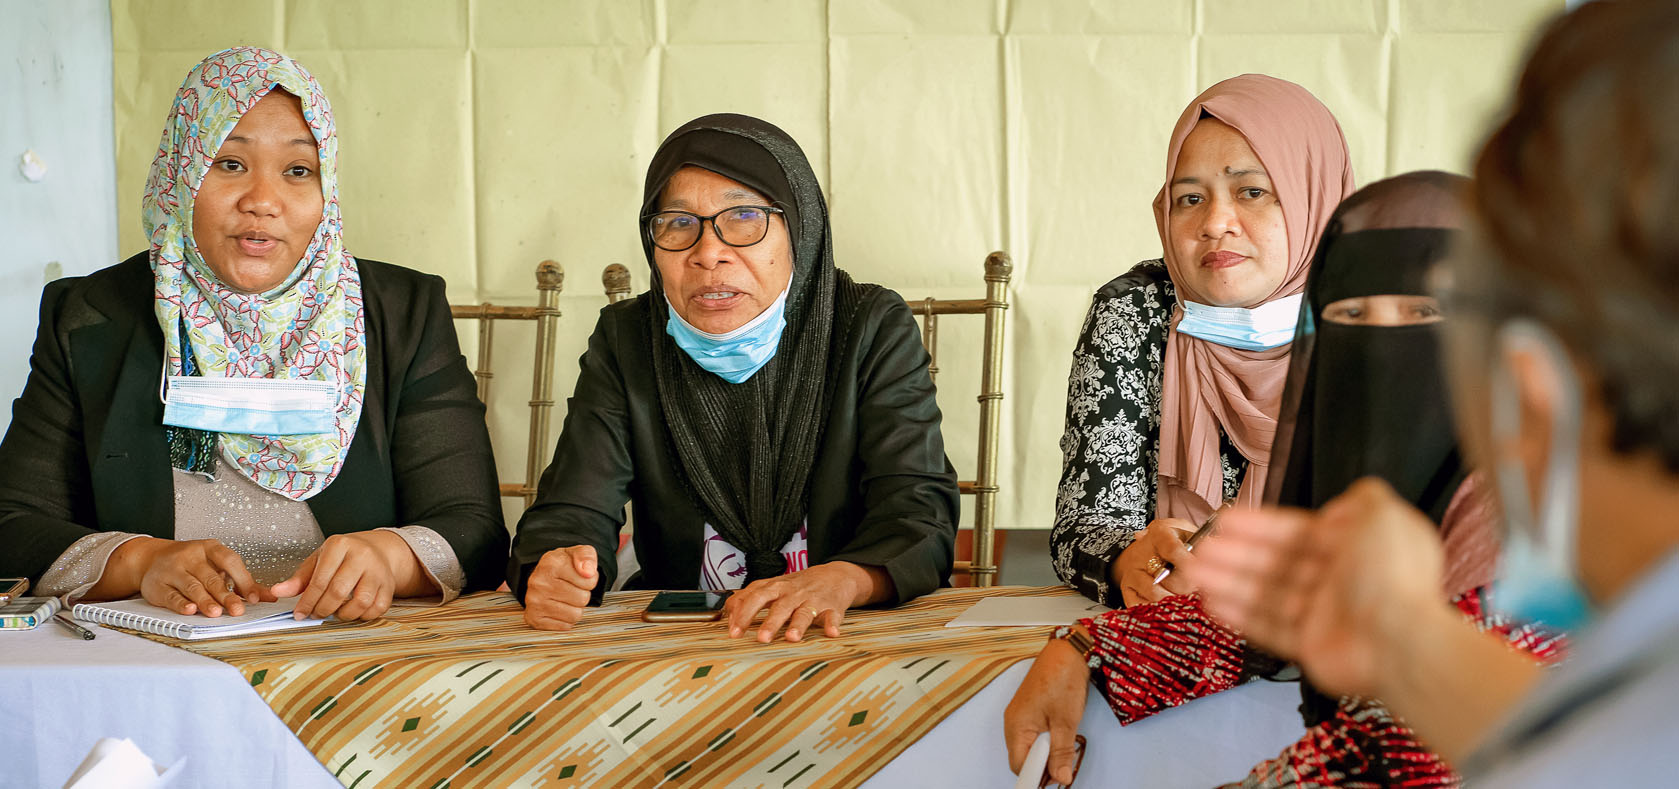 Three mediators from the Philippines conflict mediation group Tupo na Tao sa Laya-Women – from left, Khadiguia Ontok-Balah, Dialica Caup and Jho Mascod – participate in a UN Women training on conflict analysis in August 2021 in Lake Sebu, South Cotabato, the Philippines. Photo: UN Women/Louie Pacardo